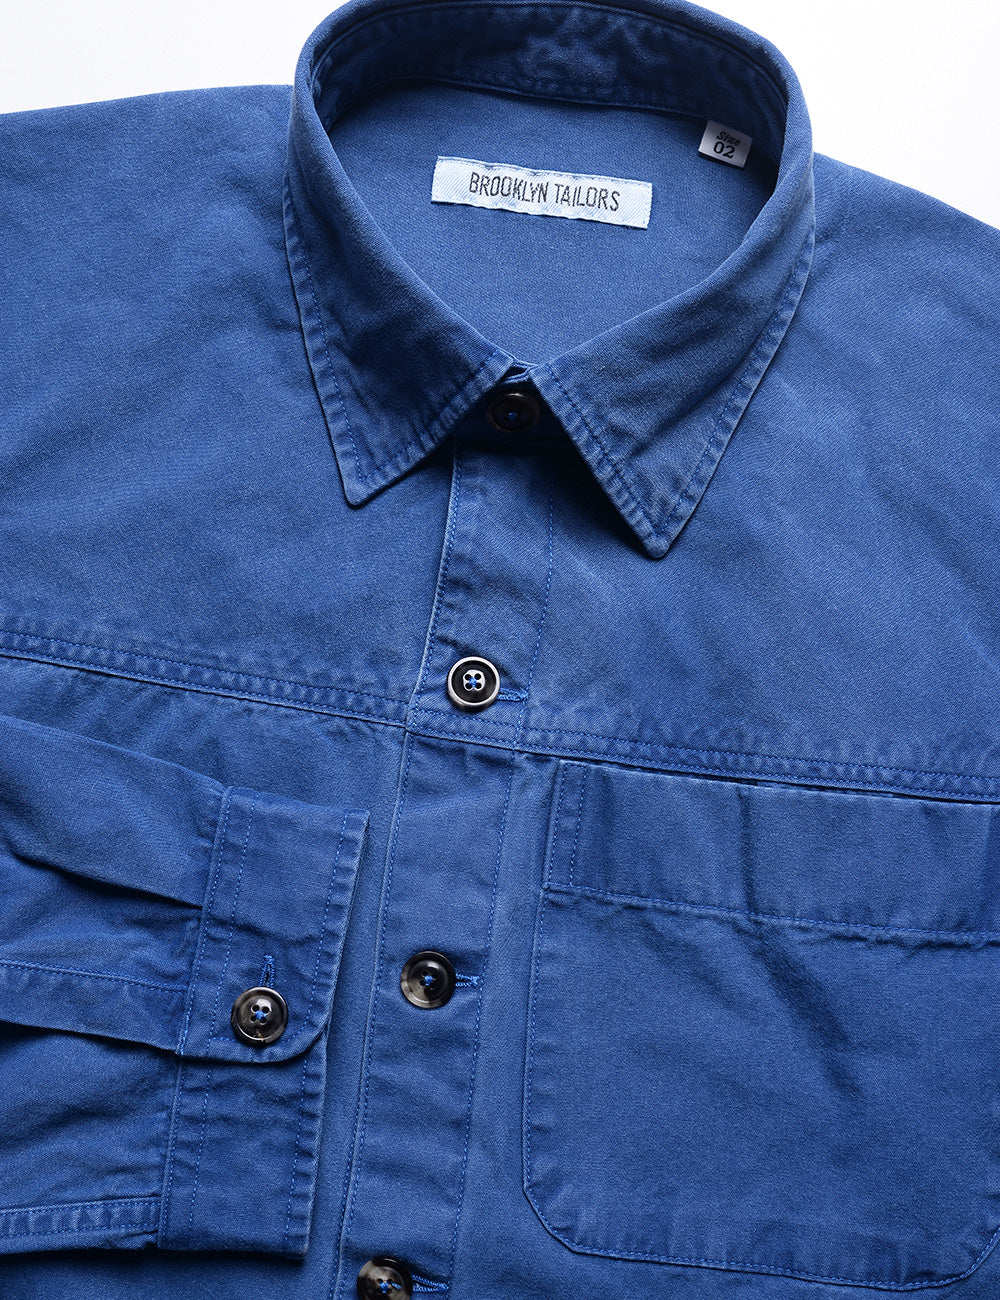 Detail of collar, buttons, placket, and pocket of Brooklyn Tailors BKT15 Shirt Jacket in Crisp Cotton - Washed Cobalt